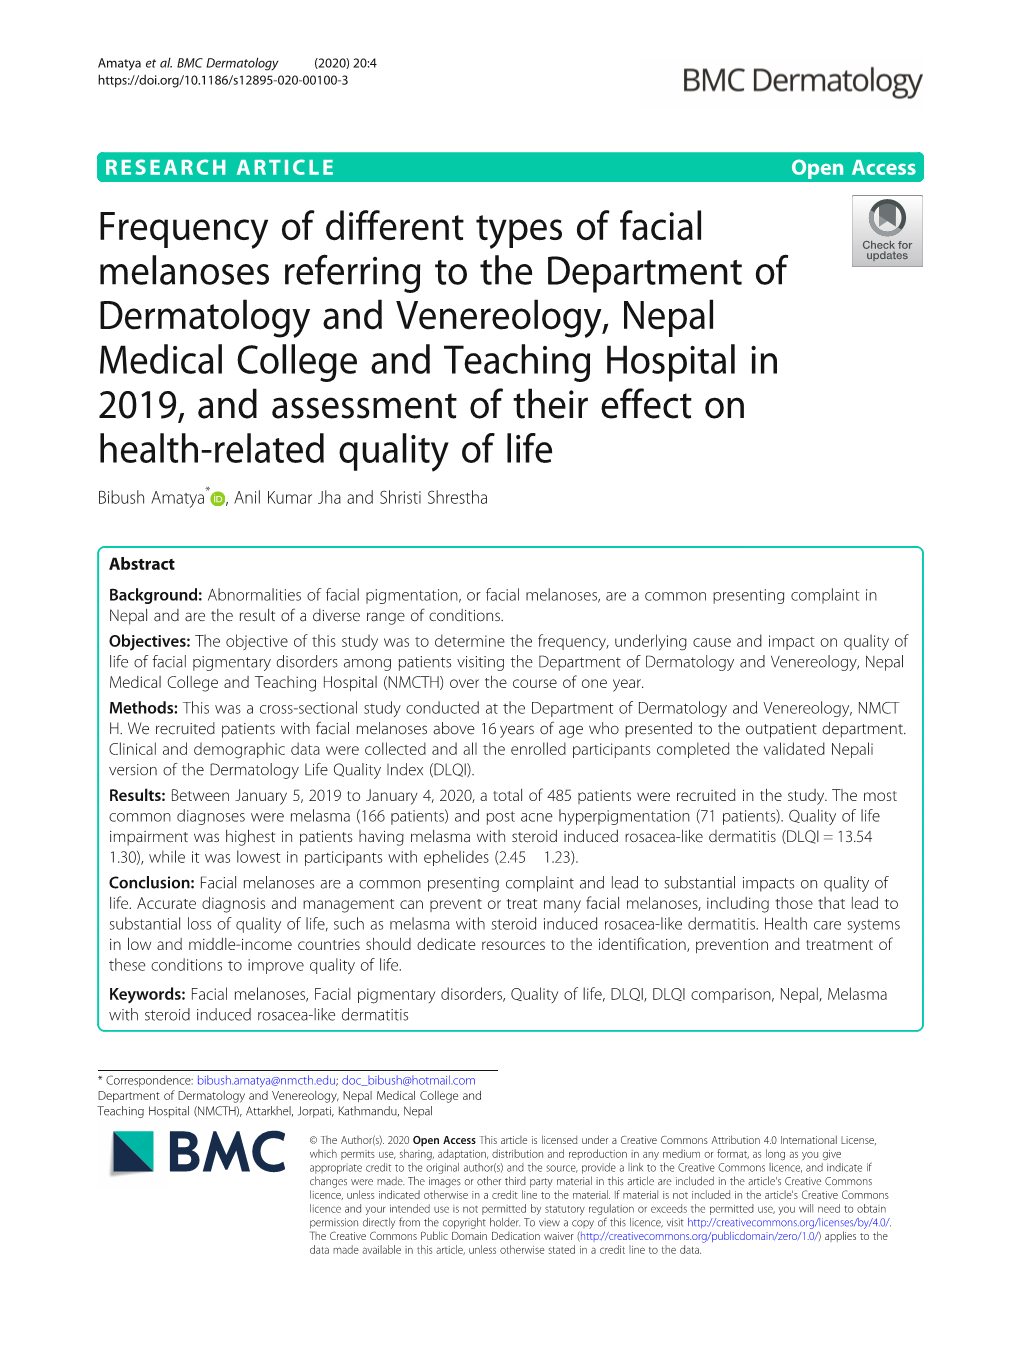 Frequency of Different Types of Facial Melanoses Referring to the Department of Dermatology and Venereology, Nepal Medical Colle